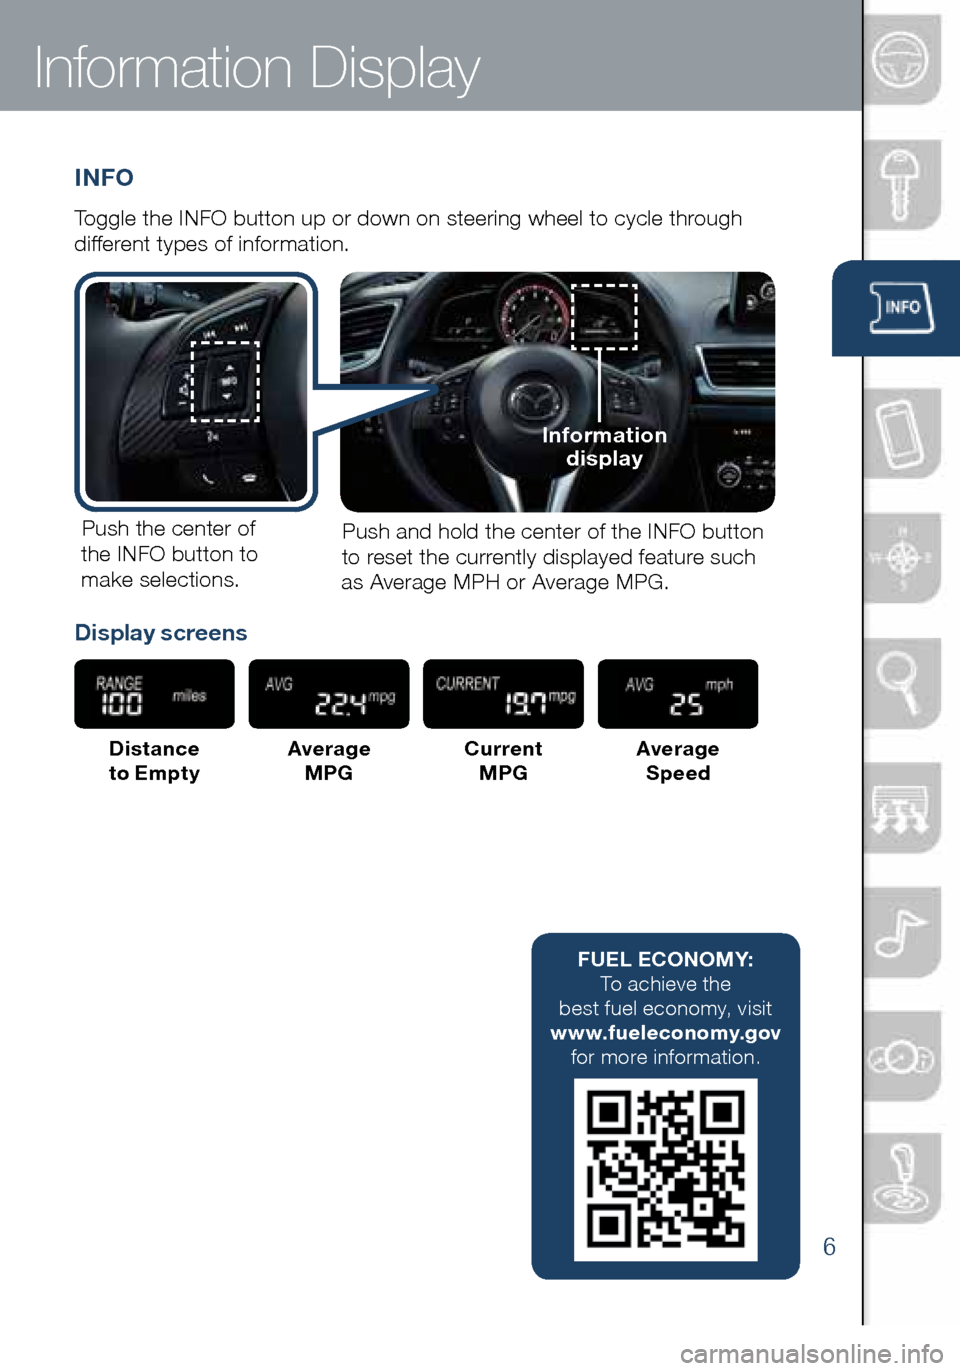 MAZDA MODEL 3 HATCHBACK 2016  Smart Start Guide (in English) 6
INFO
Toggle the INFO button up or down on steering wheel to cycle through 
different types of information.Push the center of 
the INFO button to  make selections. Push and hold the center of the INF